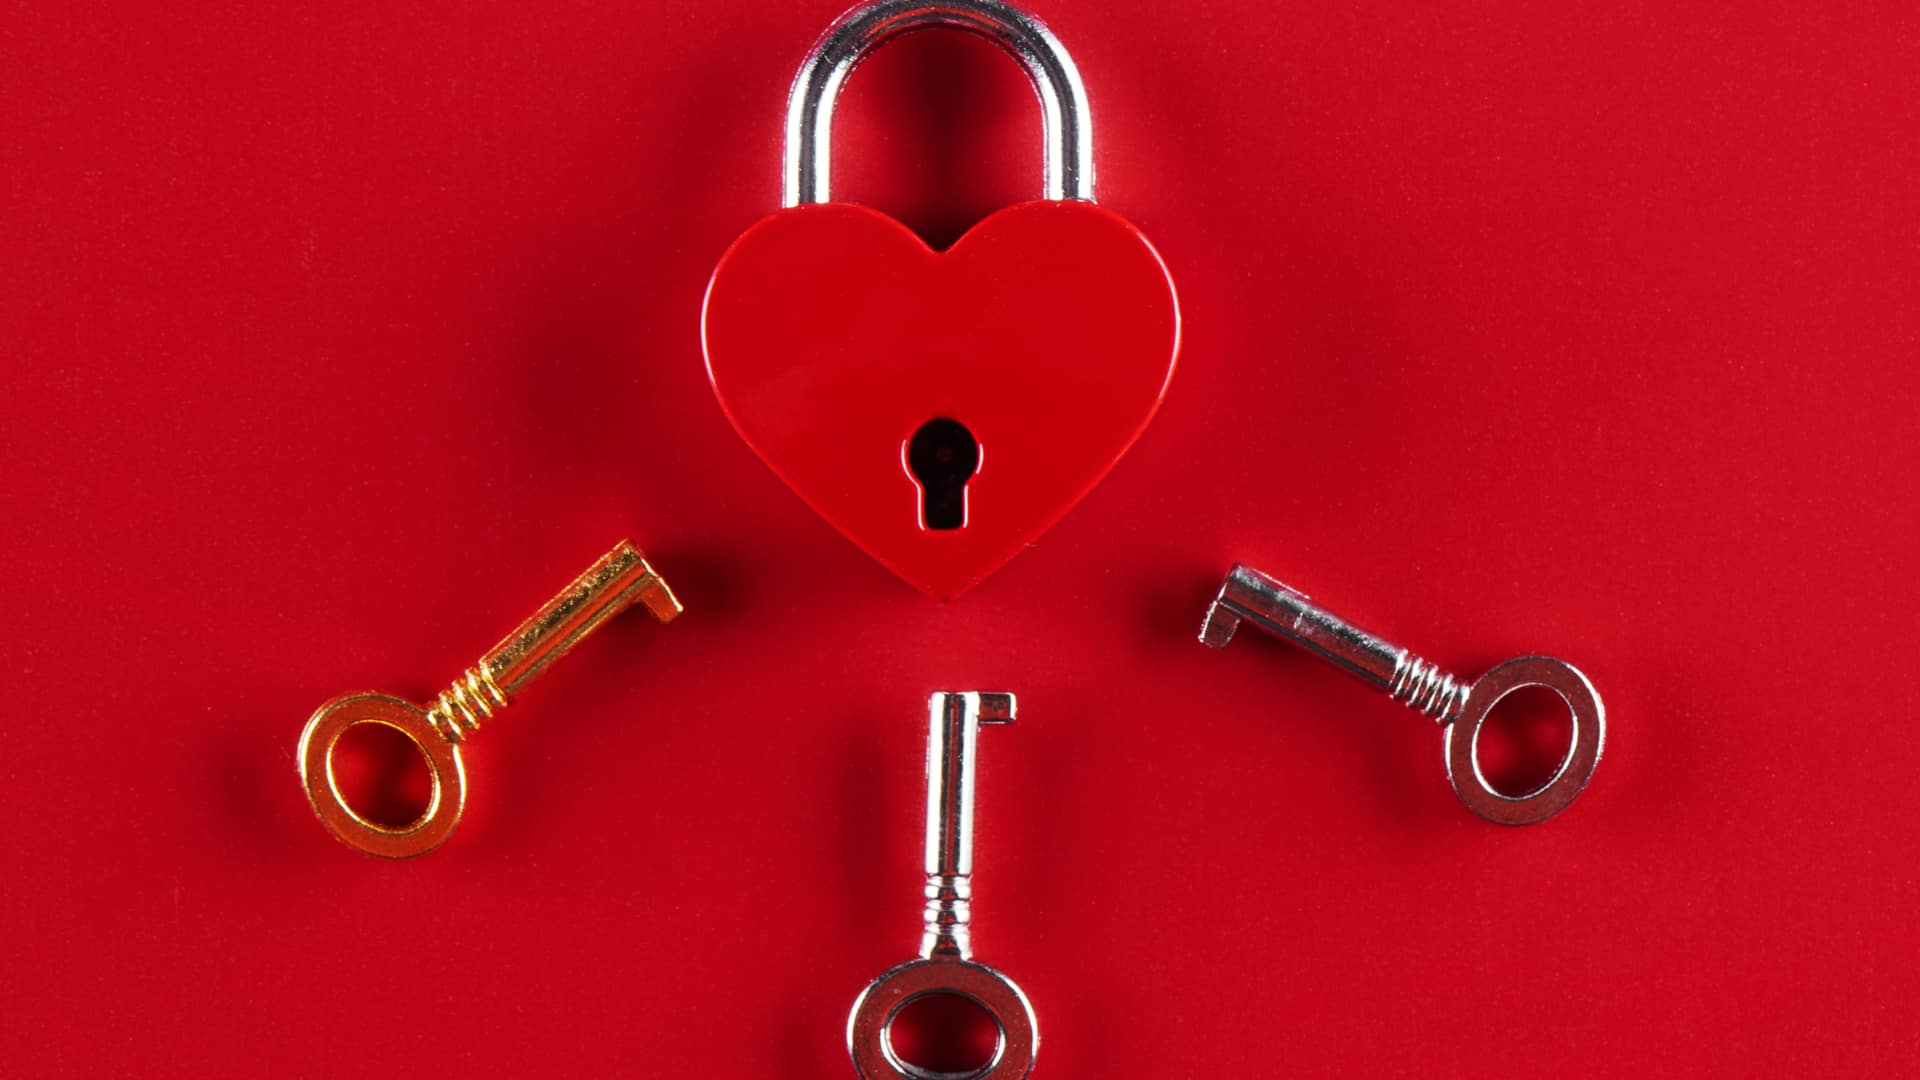  A heart shaped lock and three keys to it on a red background